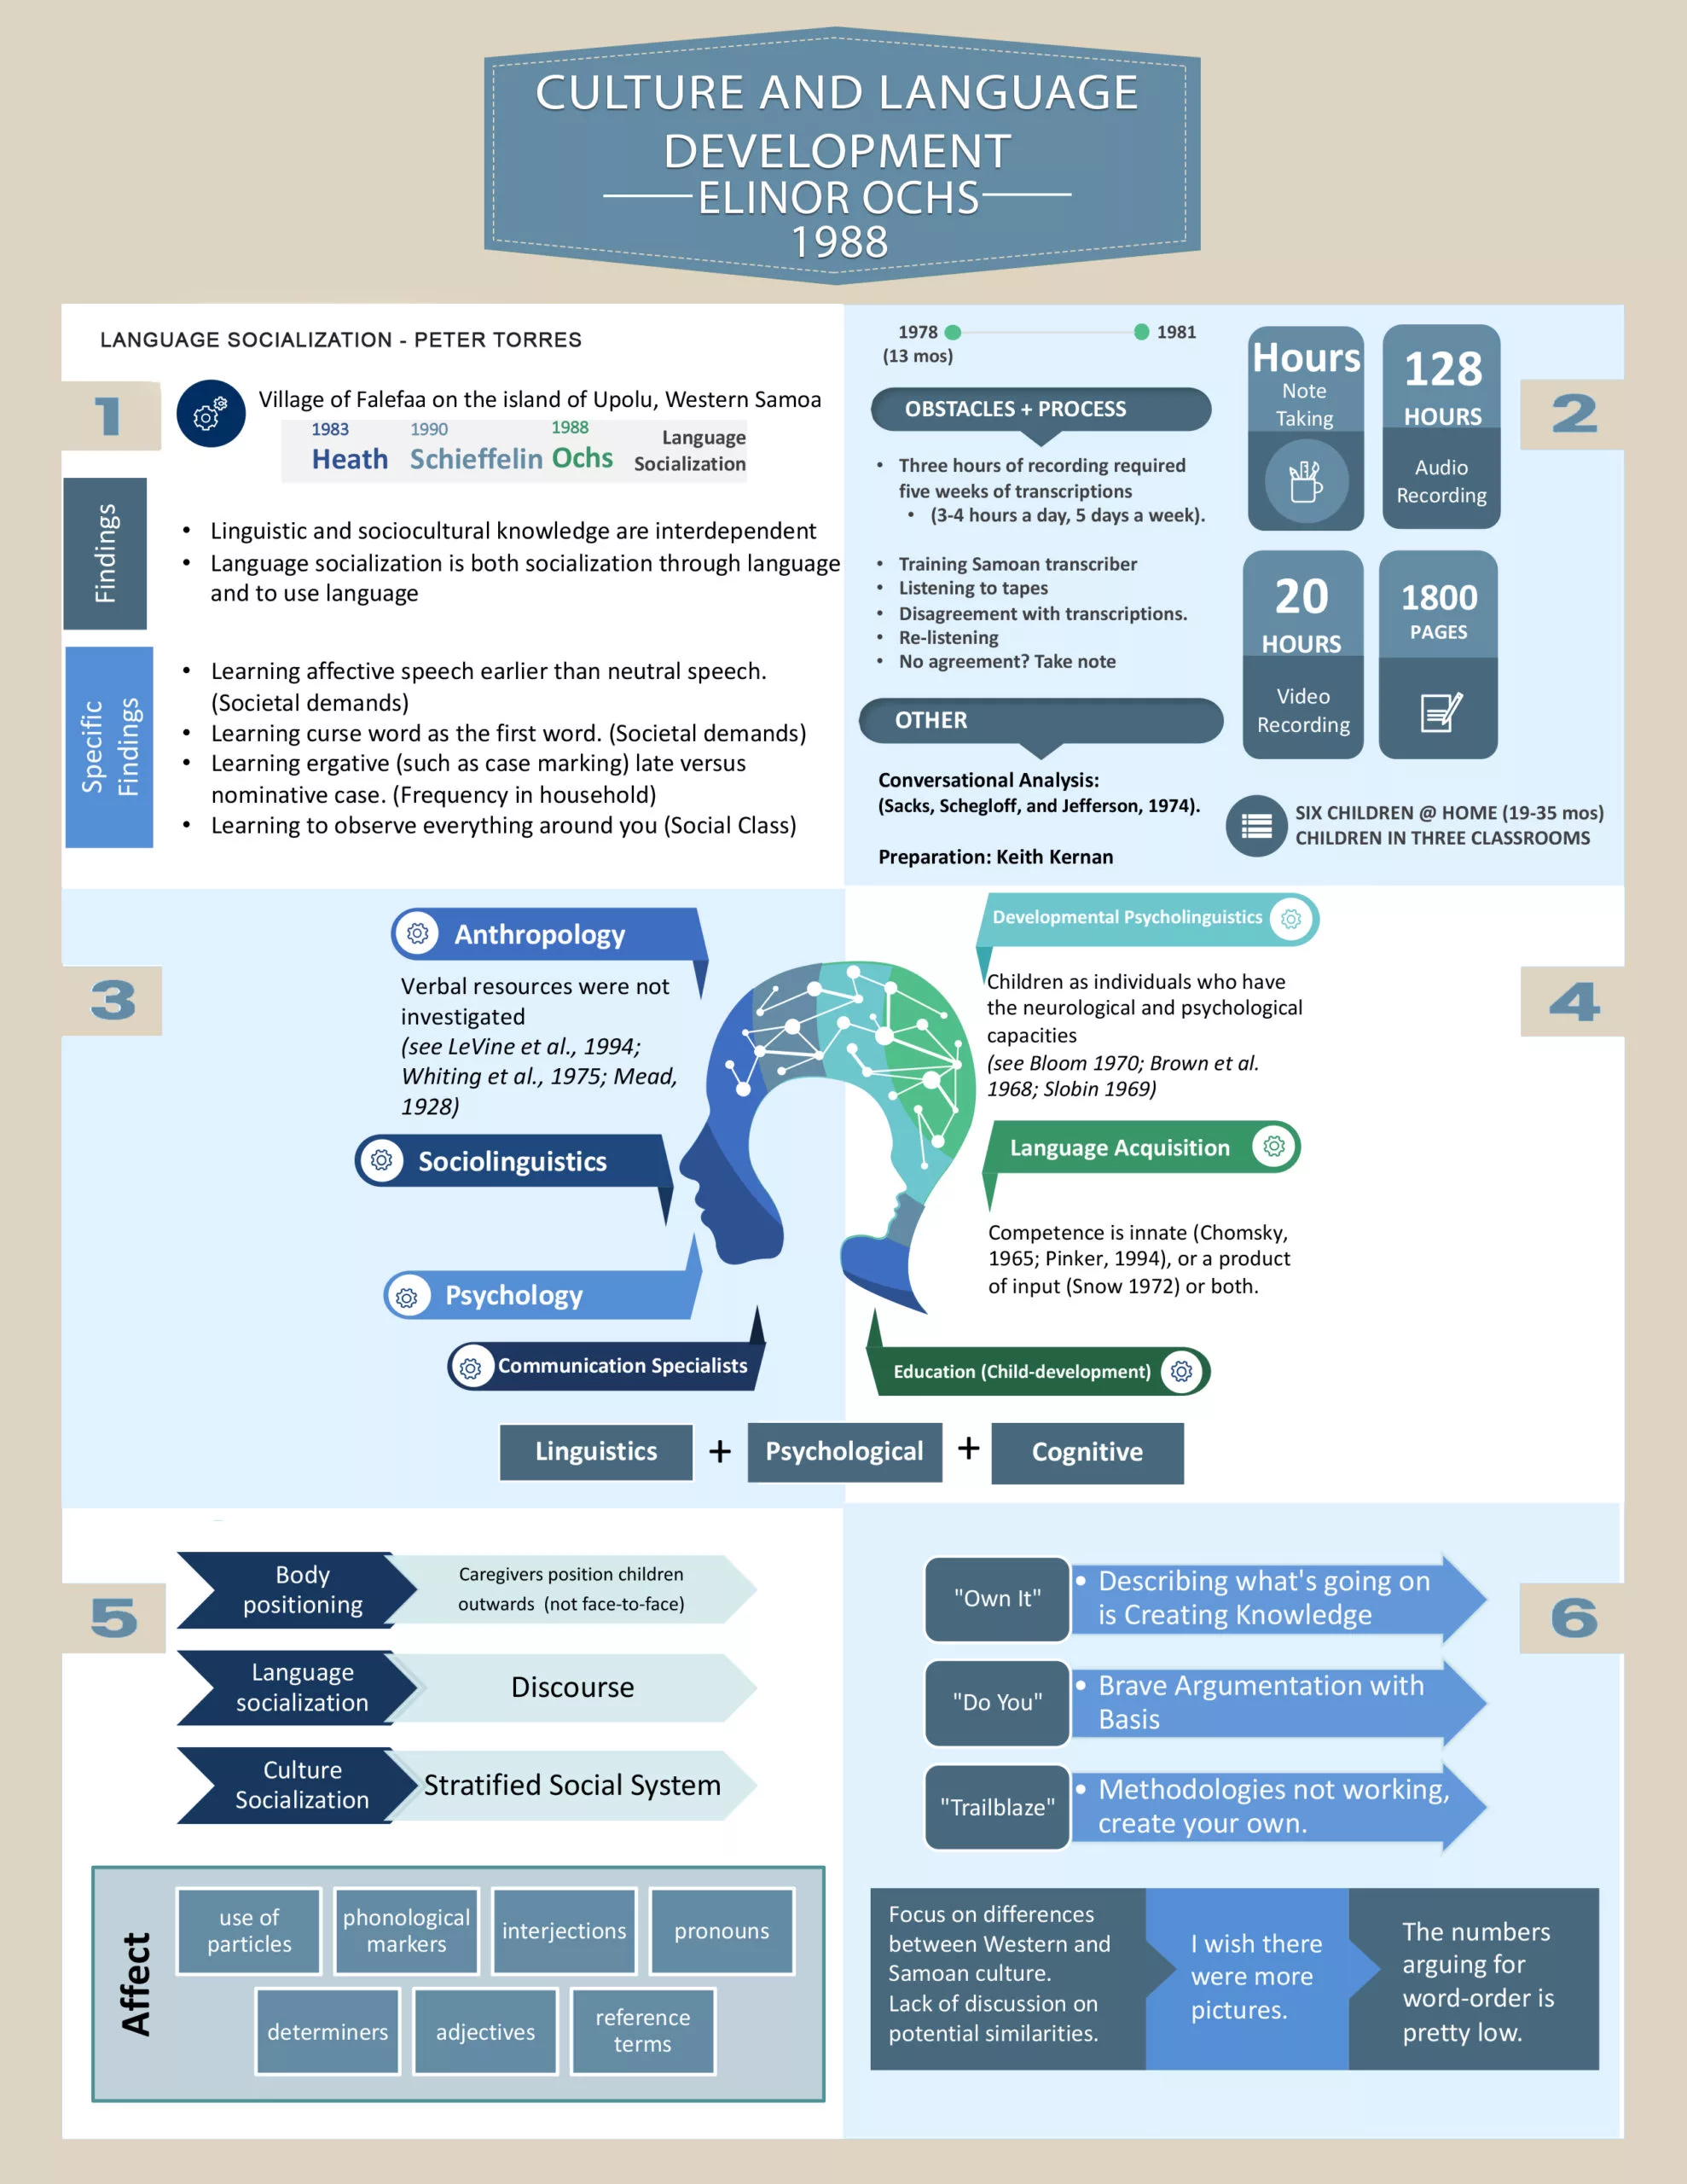 Culture and Language Development Infographic